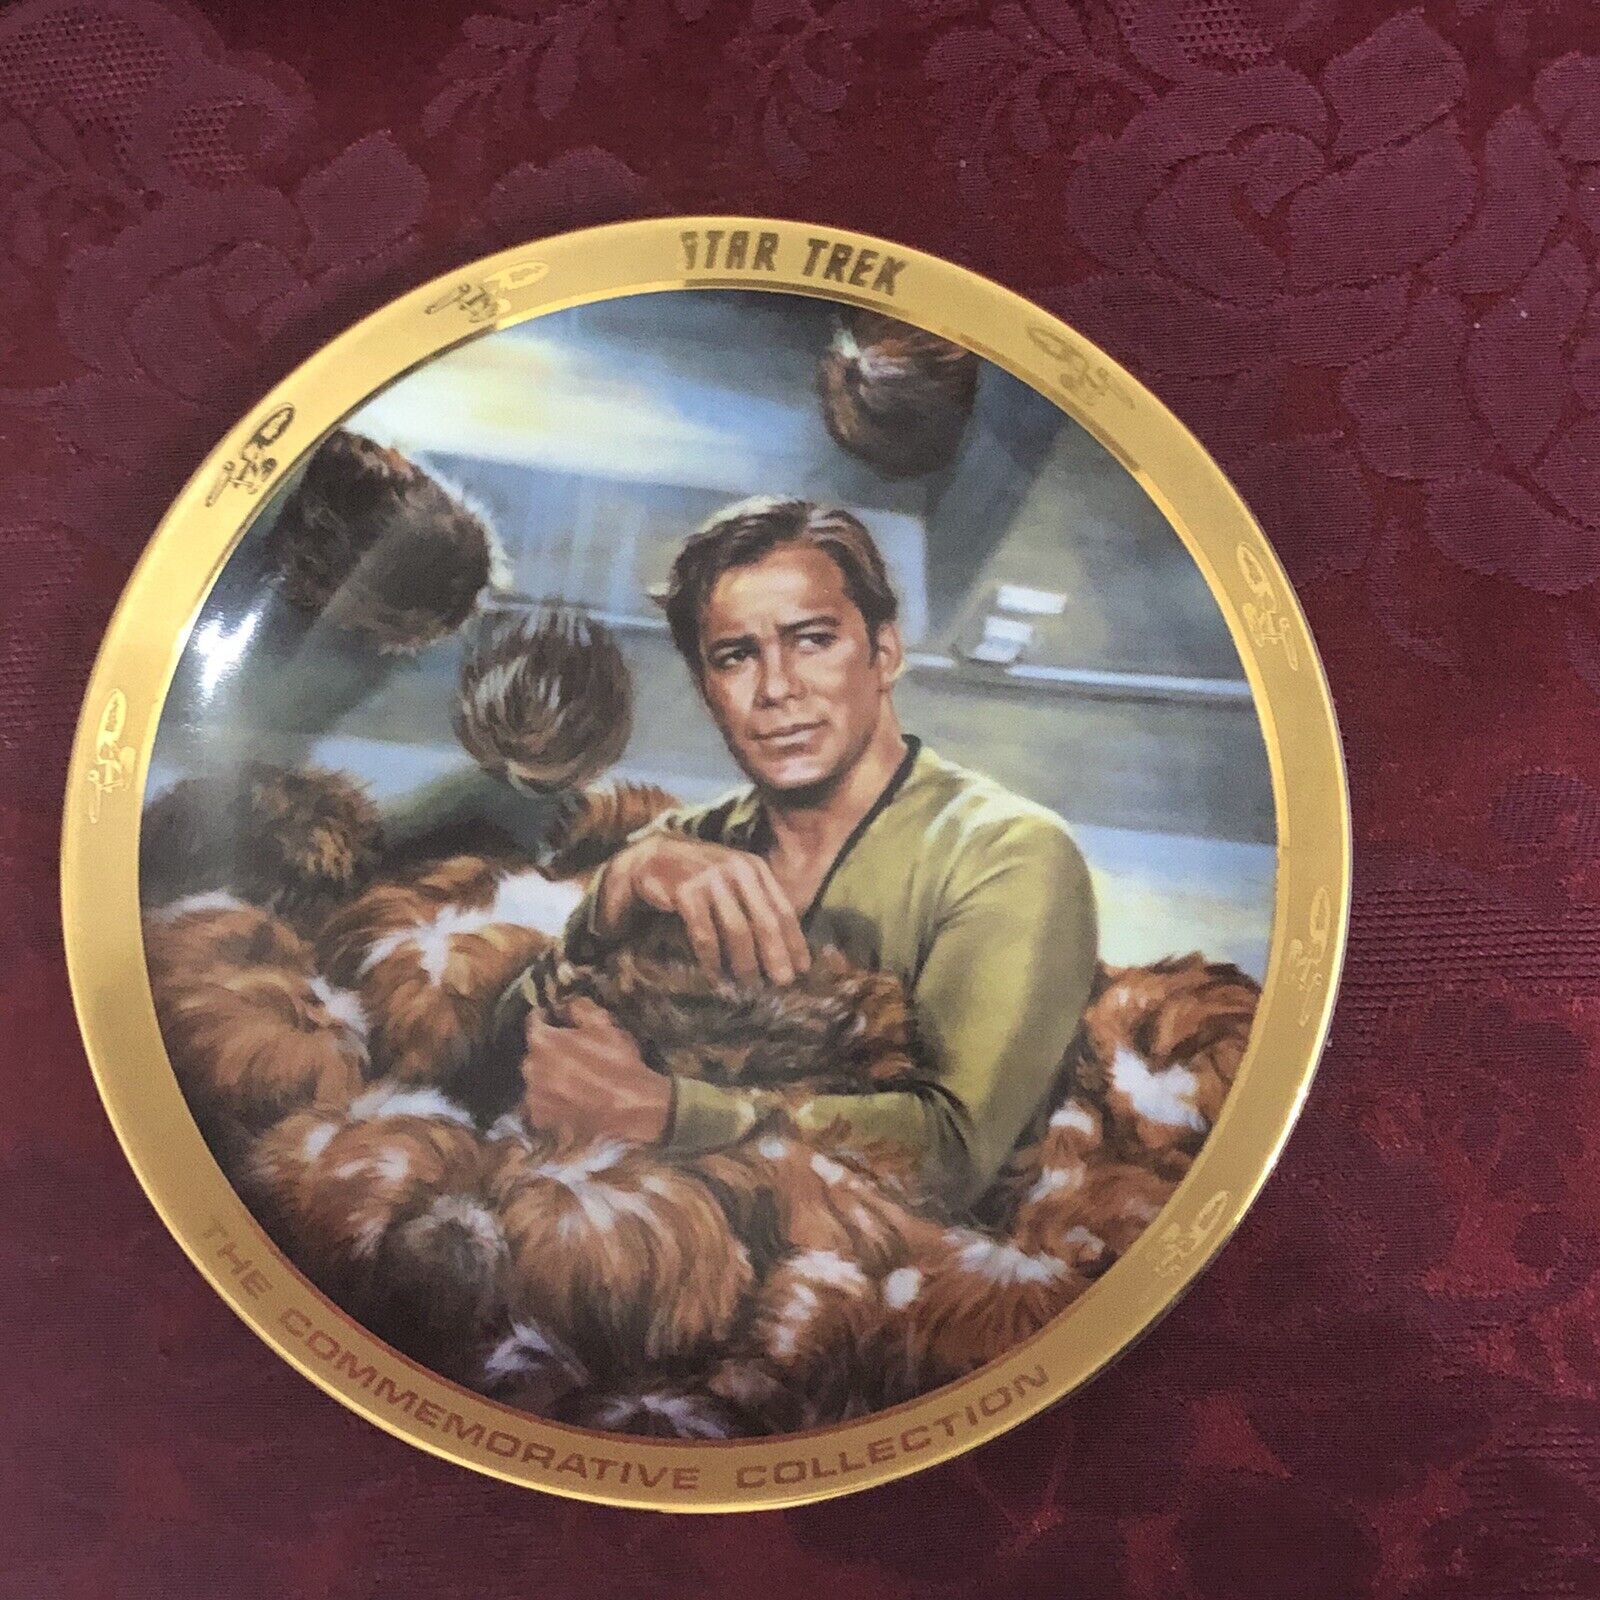 Star Trek Plate 9” Captain Kirk Commemorative The Trouble with Tribbles #332